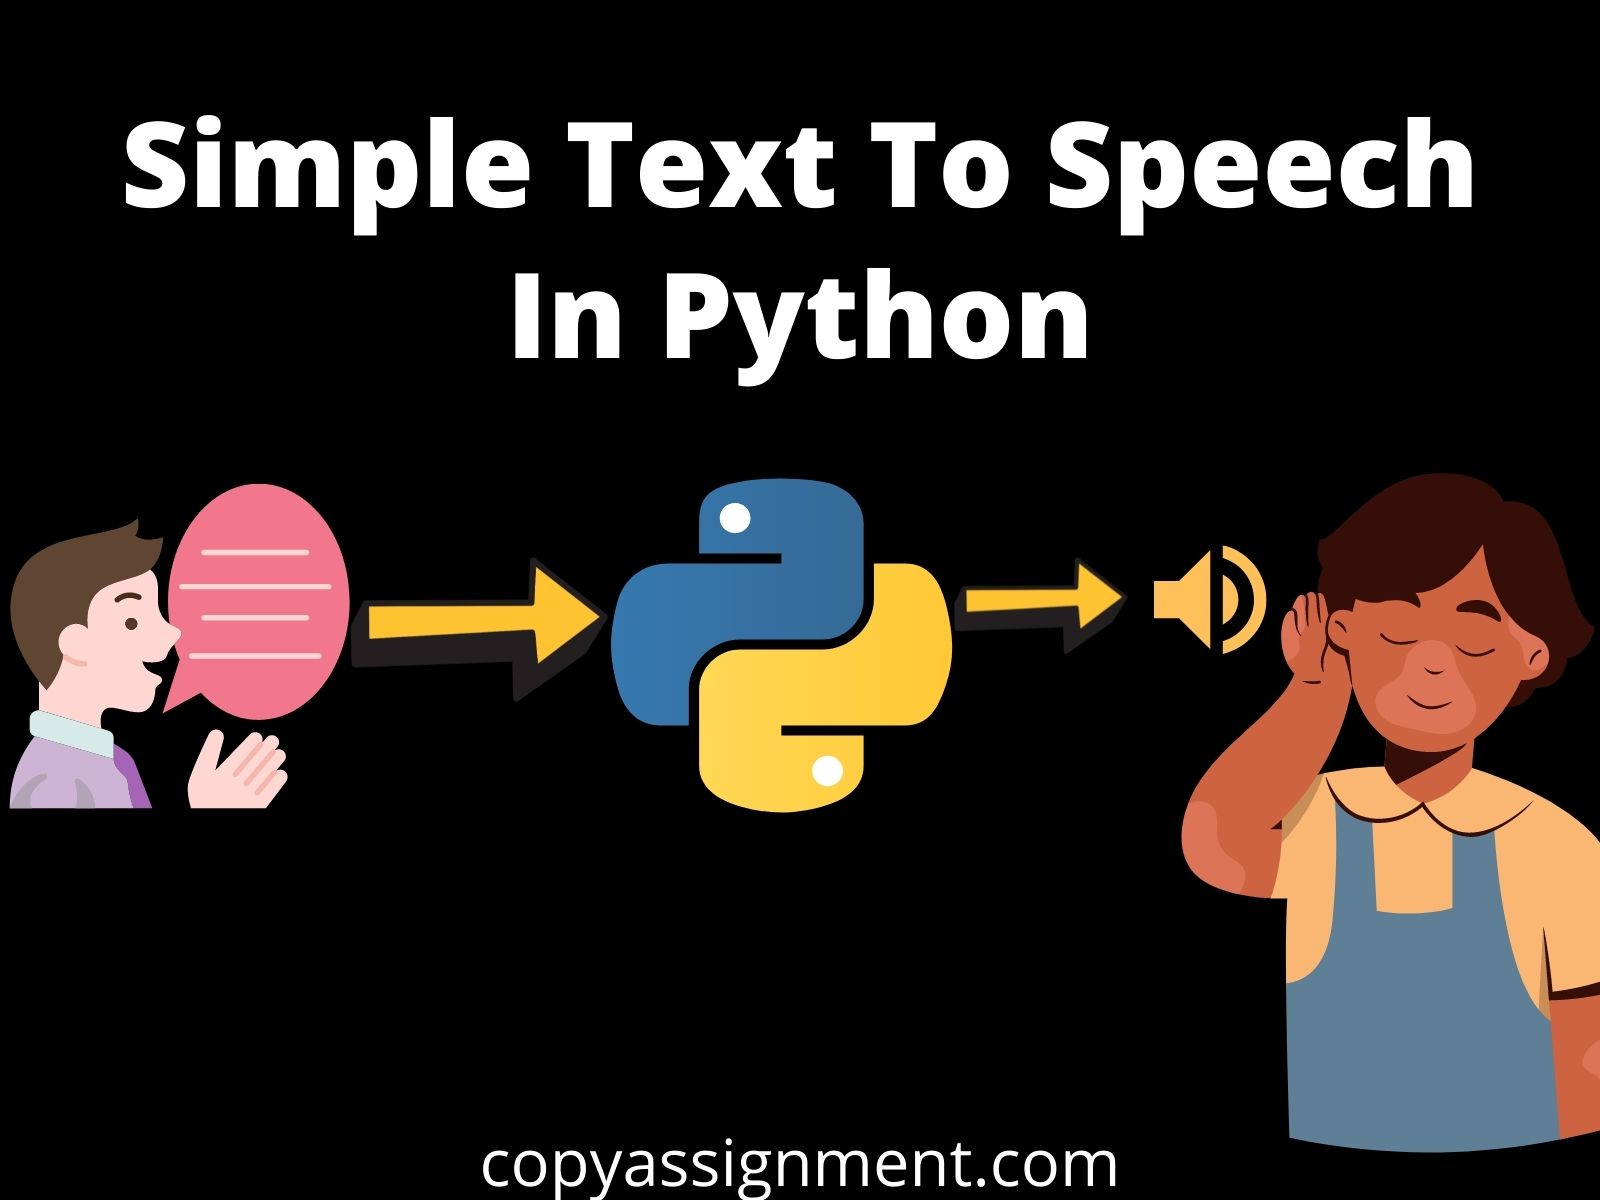 libraries to convert speech to text in python